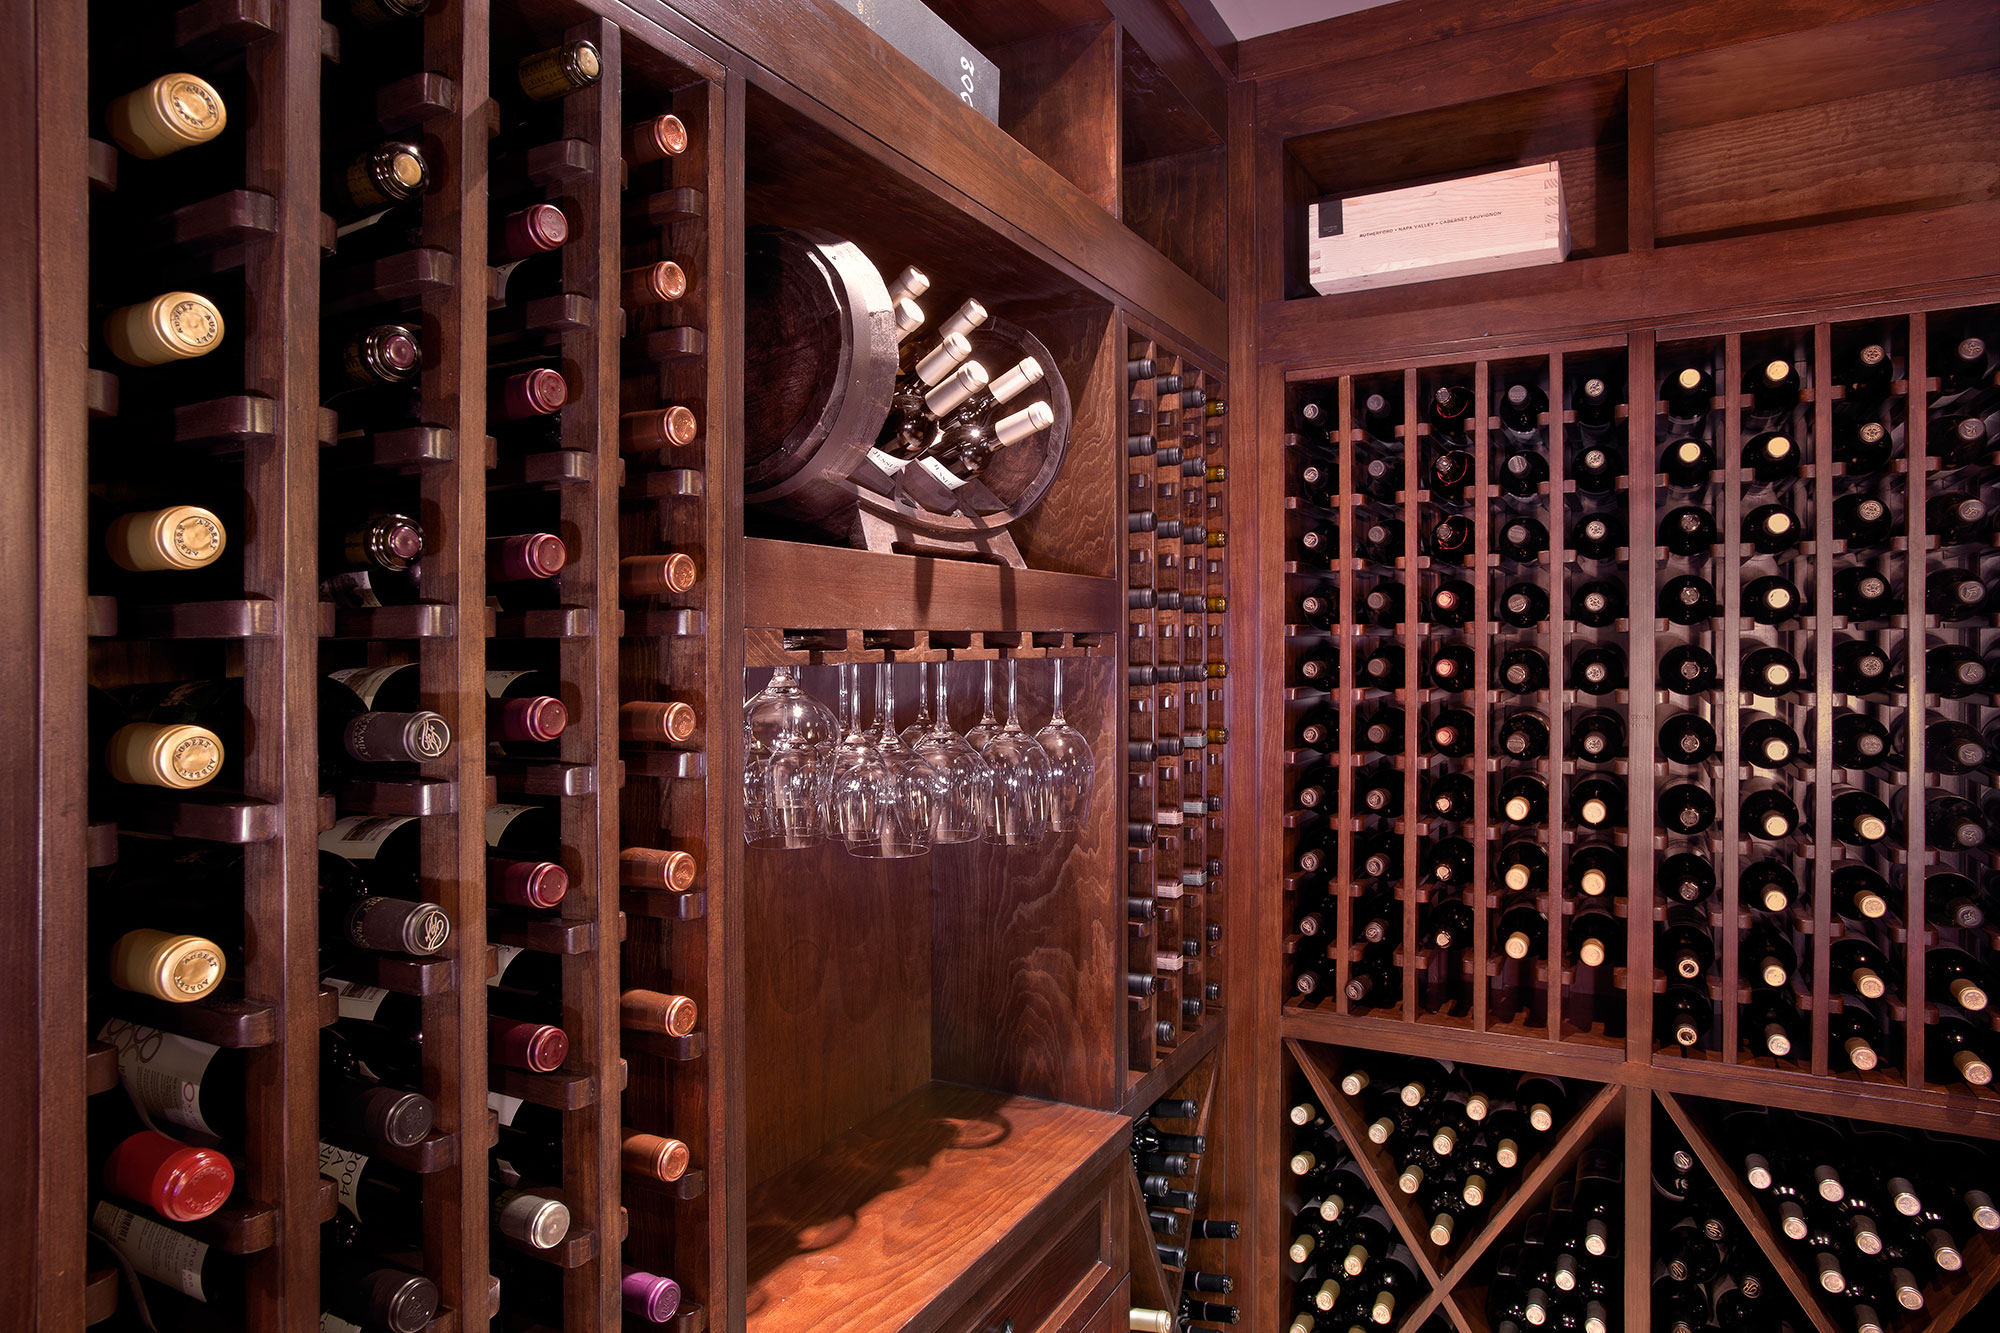 Side view of wine cellar centerpiece with elegant glassware display.  - Glenview Haus - Custom Doors, Wine Cellars and Cabinets in Chicago